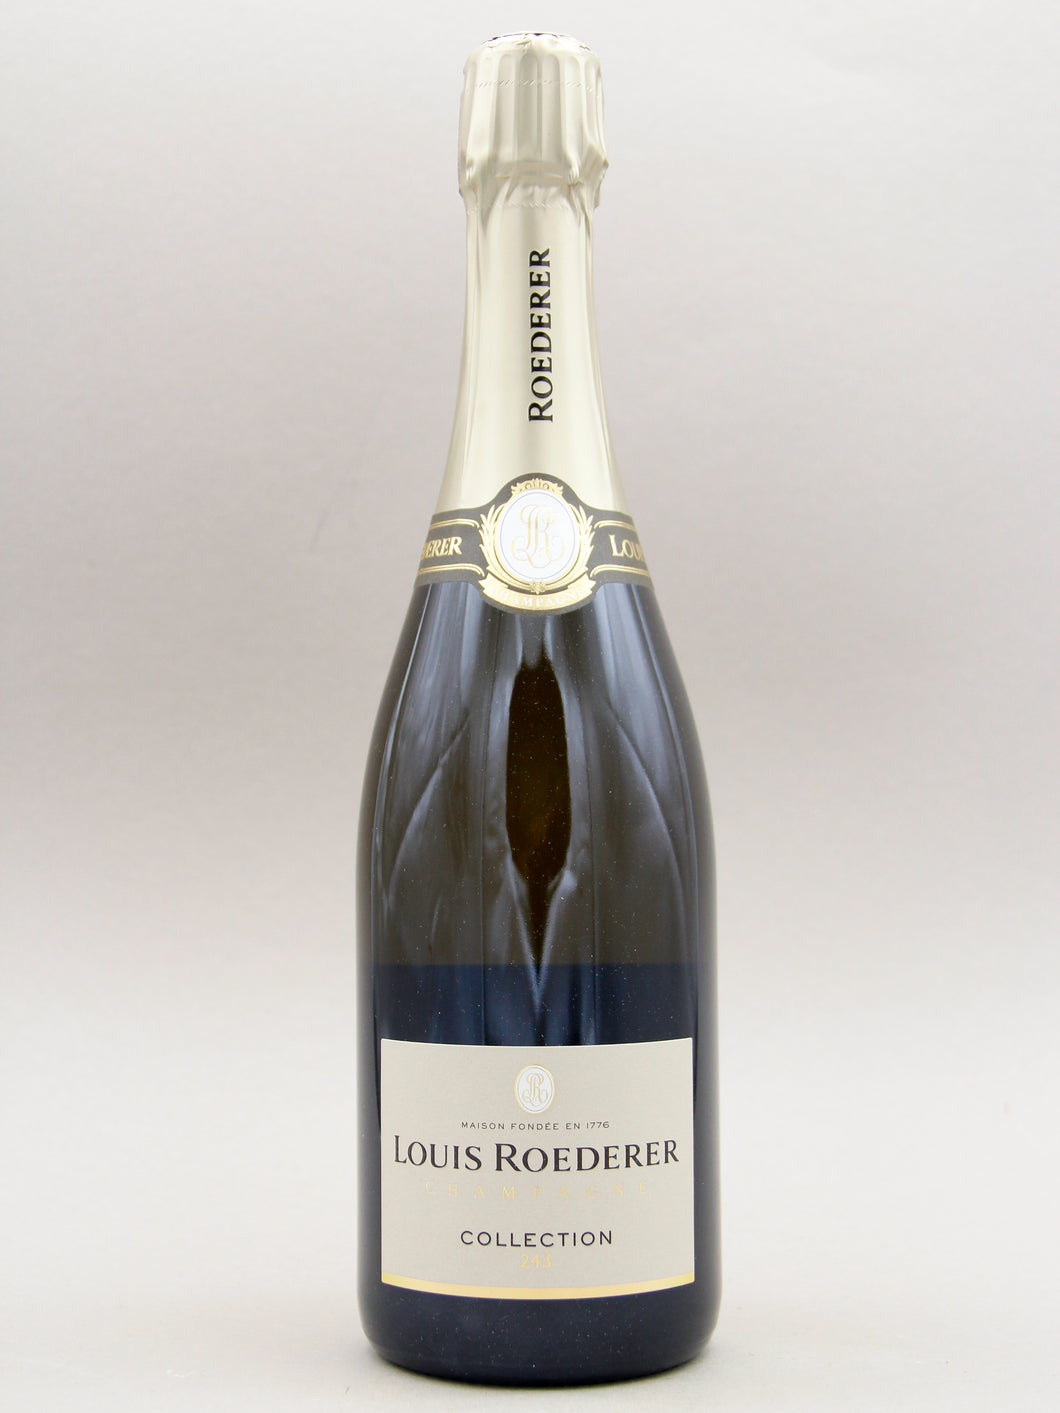 Louis Roederer Champagne, Collection 243 (12.5%, 75cl)